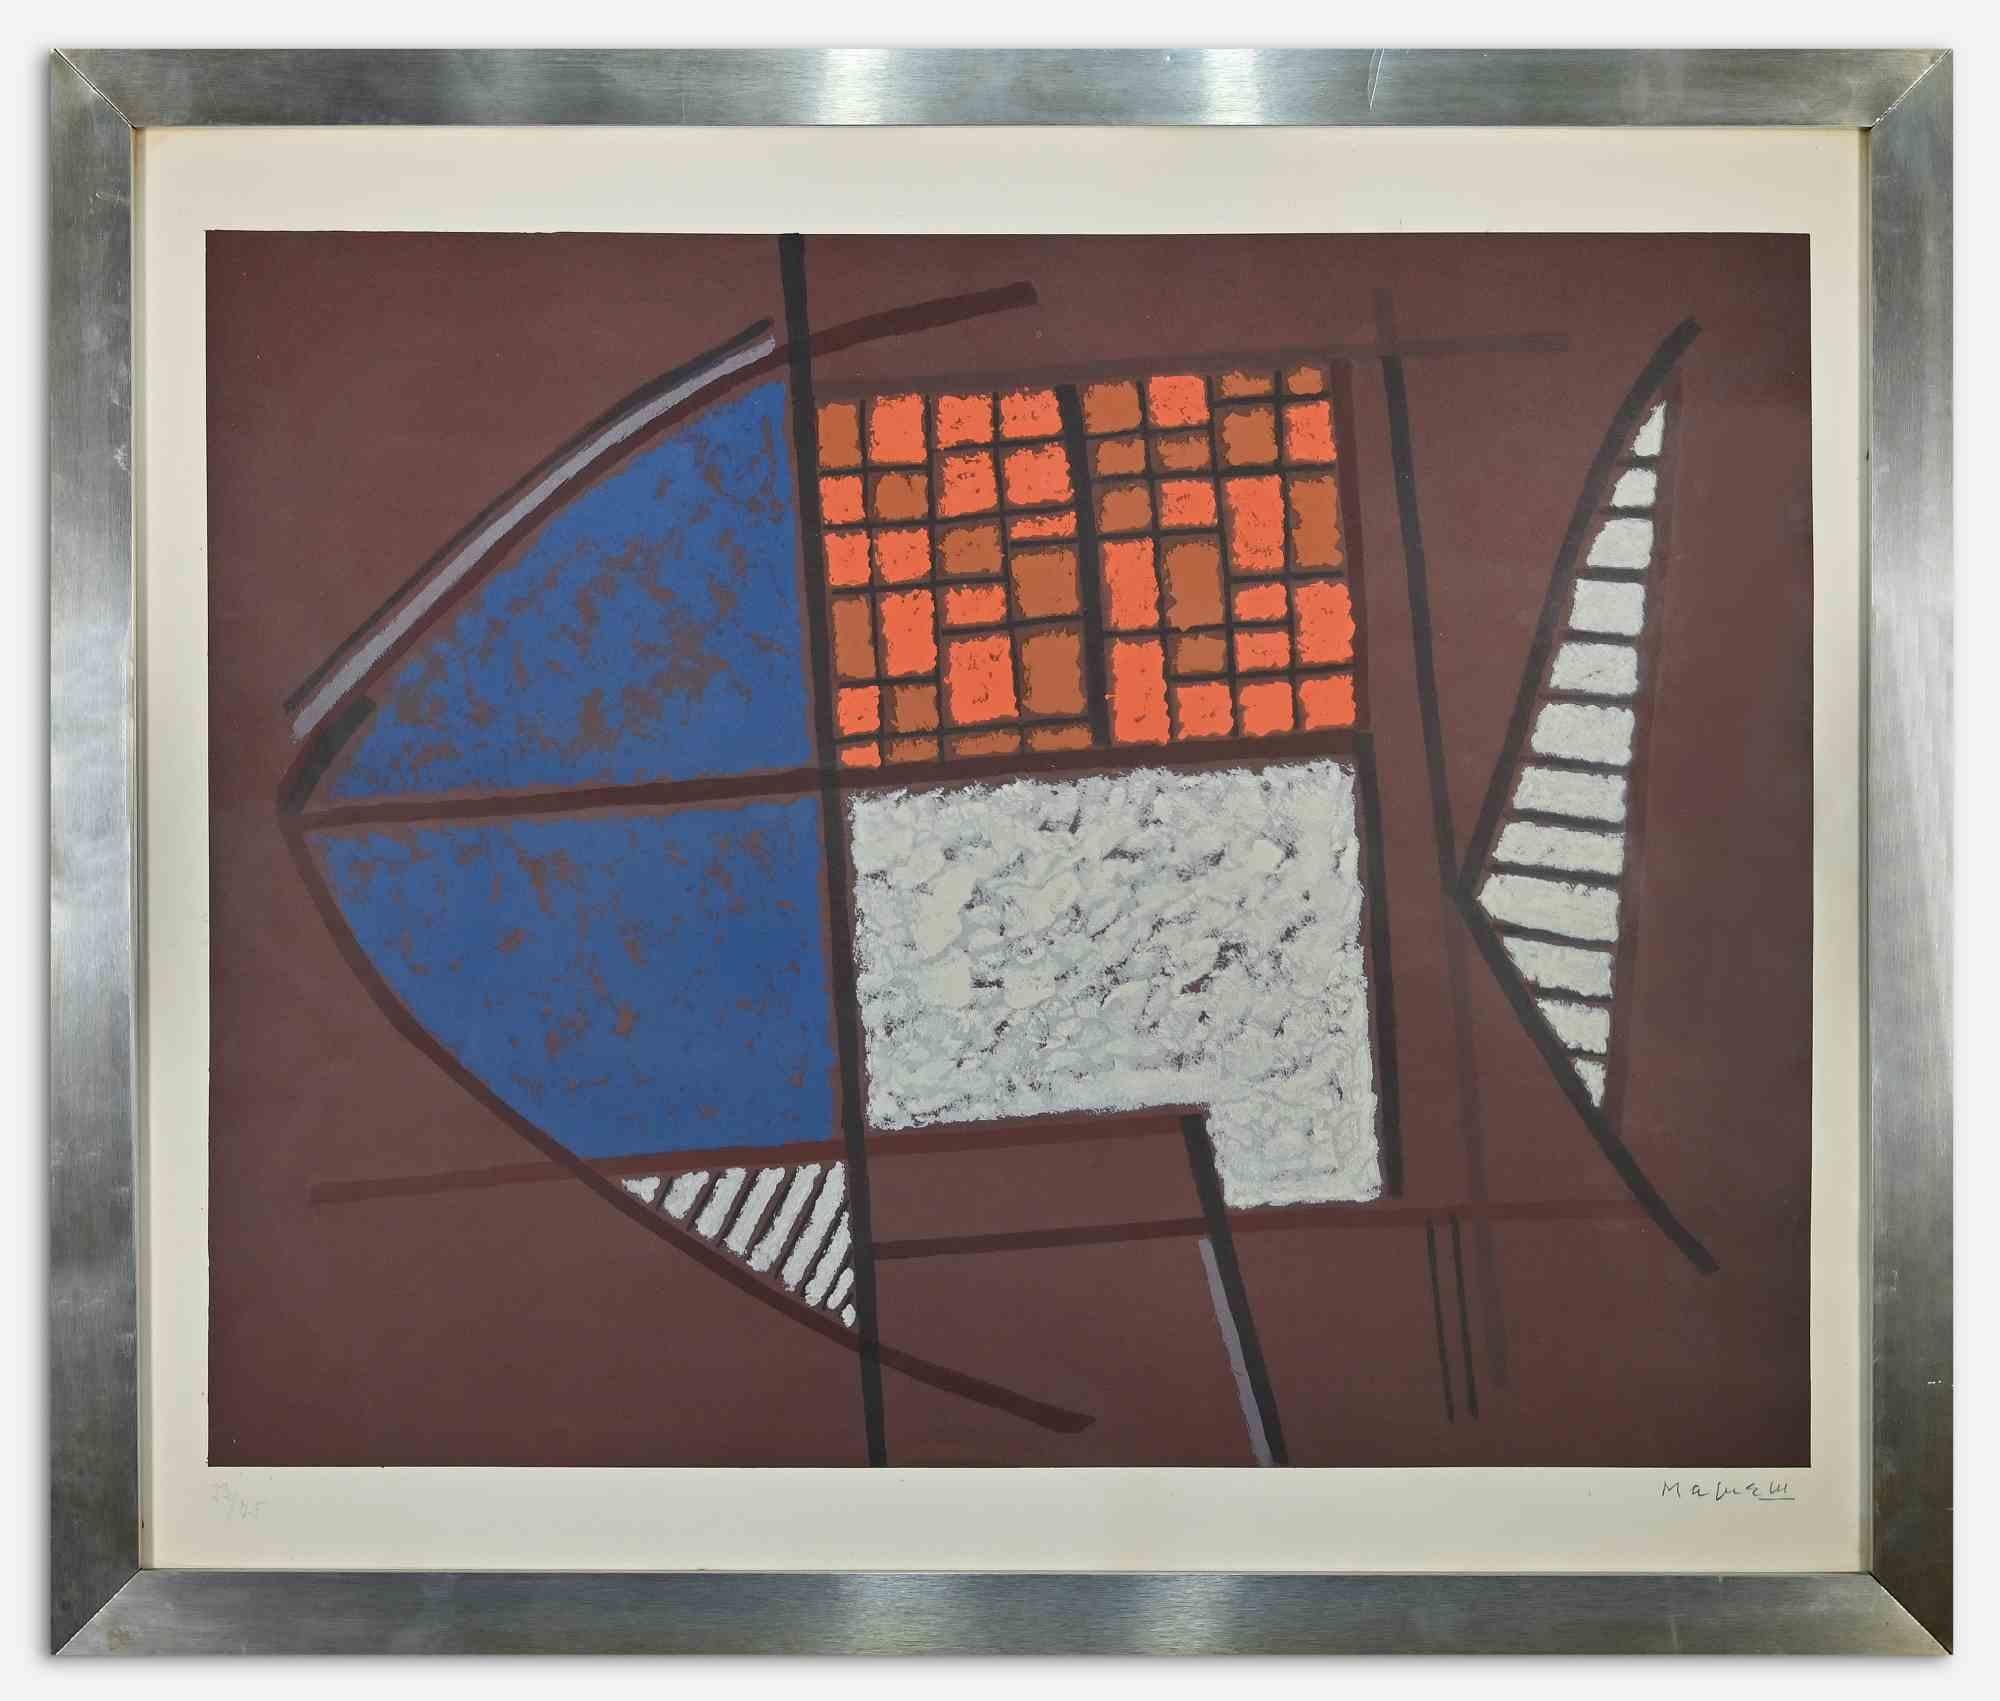 Abstract composition is an original contemporary artwork realized in the 1970s by Alberto Magnelli.

Mixed colored lithograph.

Good conditions except for some light yellowing of paper.

Hand signed on the lower right margin.

Numbered on the lower